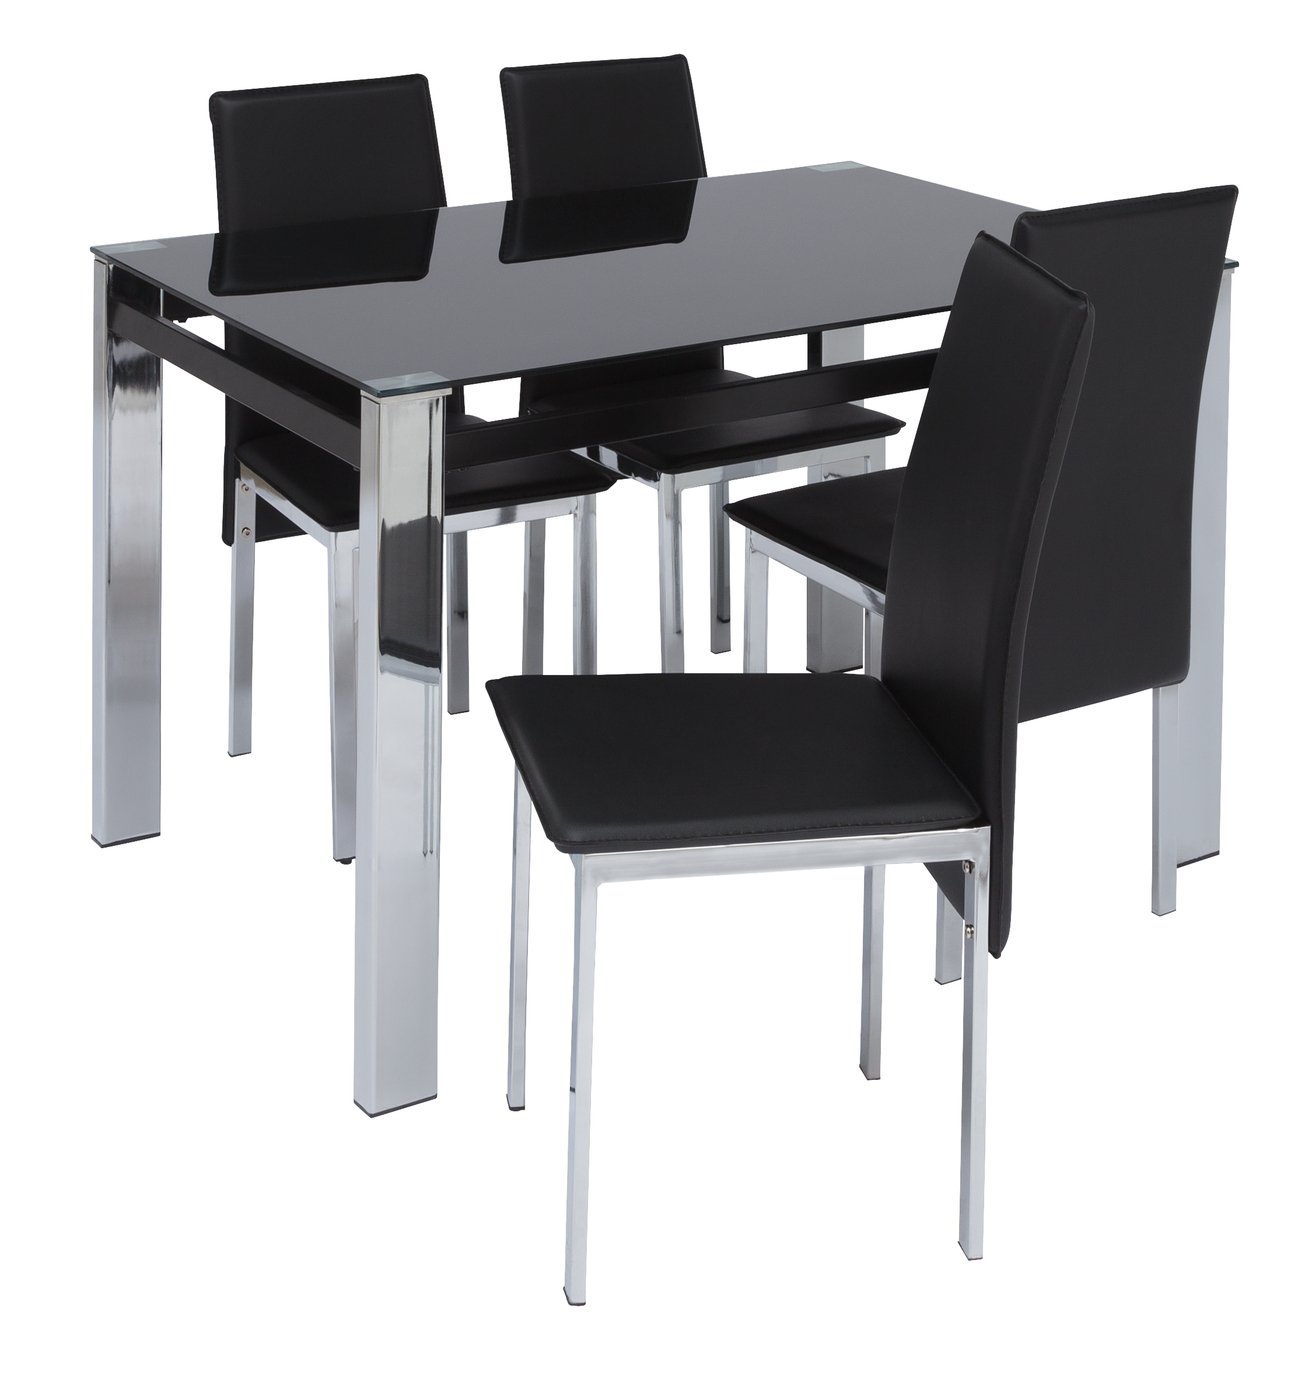 Argos Home Fitz Black Glass Dining Table & 4 Black Chairs